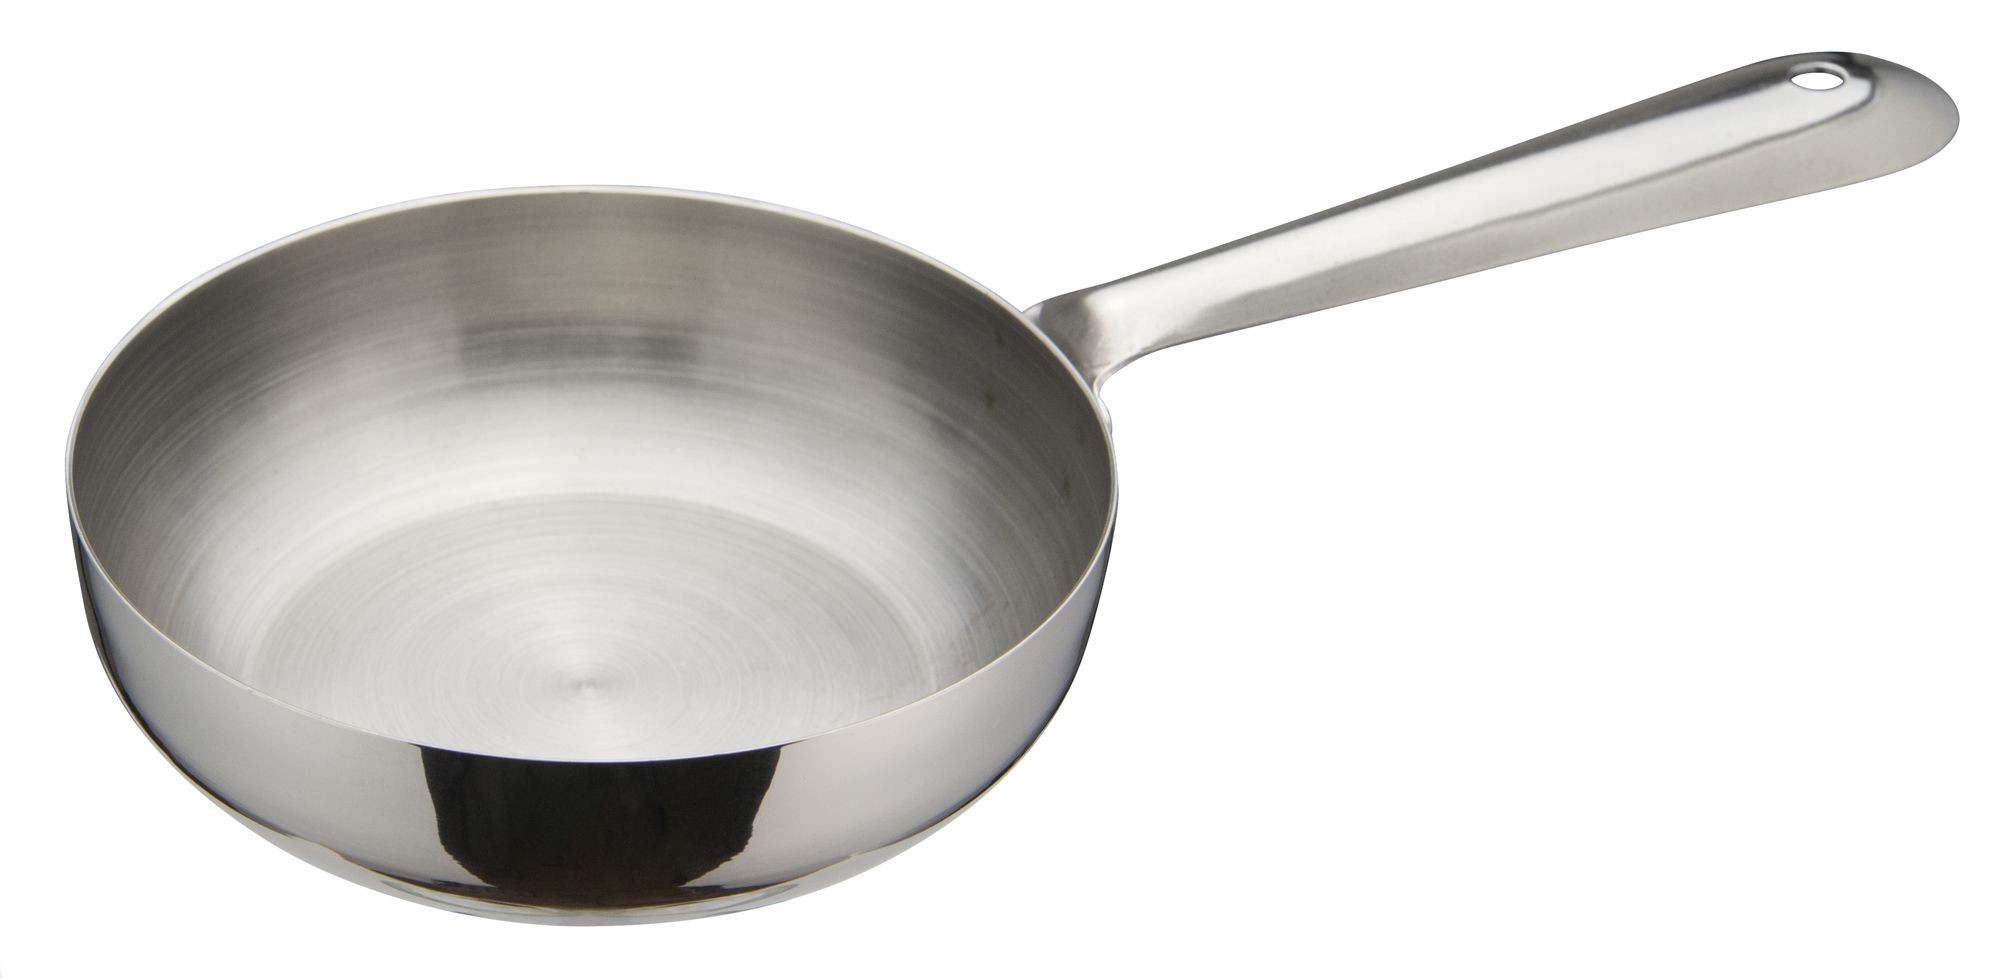 Winco DCWC-102S Stainless Steel 4-1/2" Dia x 1-3/8" H Mini Fry Pan